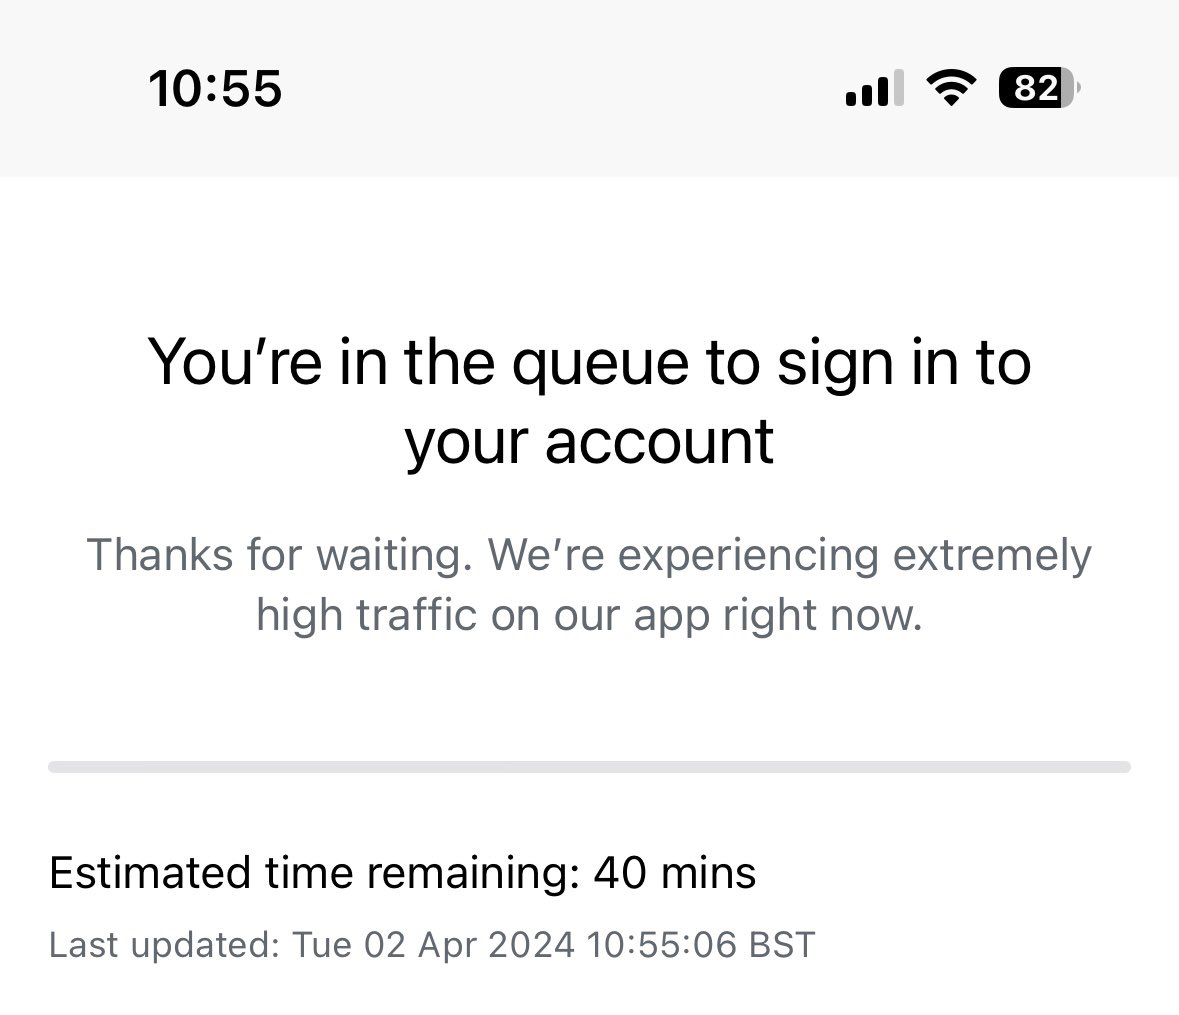 Errr what universe is this?! Is my energy supplier @ScottishPower experiencing traffic the size of Taylor Swift’s concert tickets going live?! 40 minute wait to just see some labels and graphs in an app, holy cow